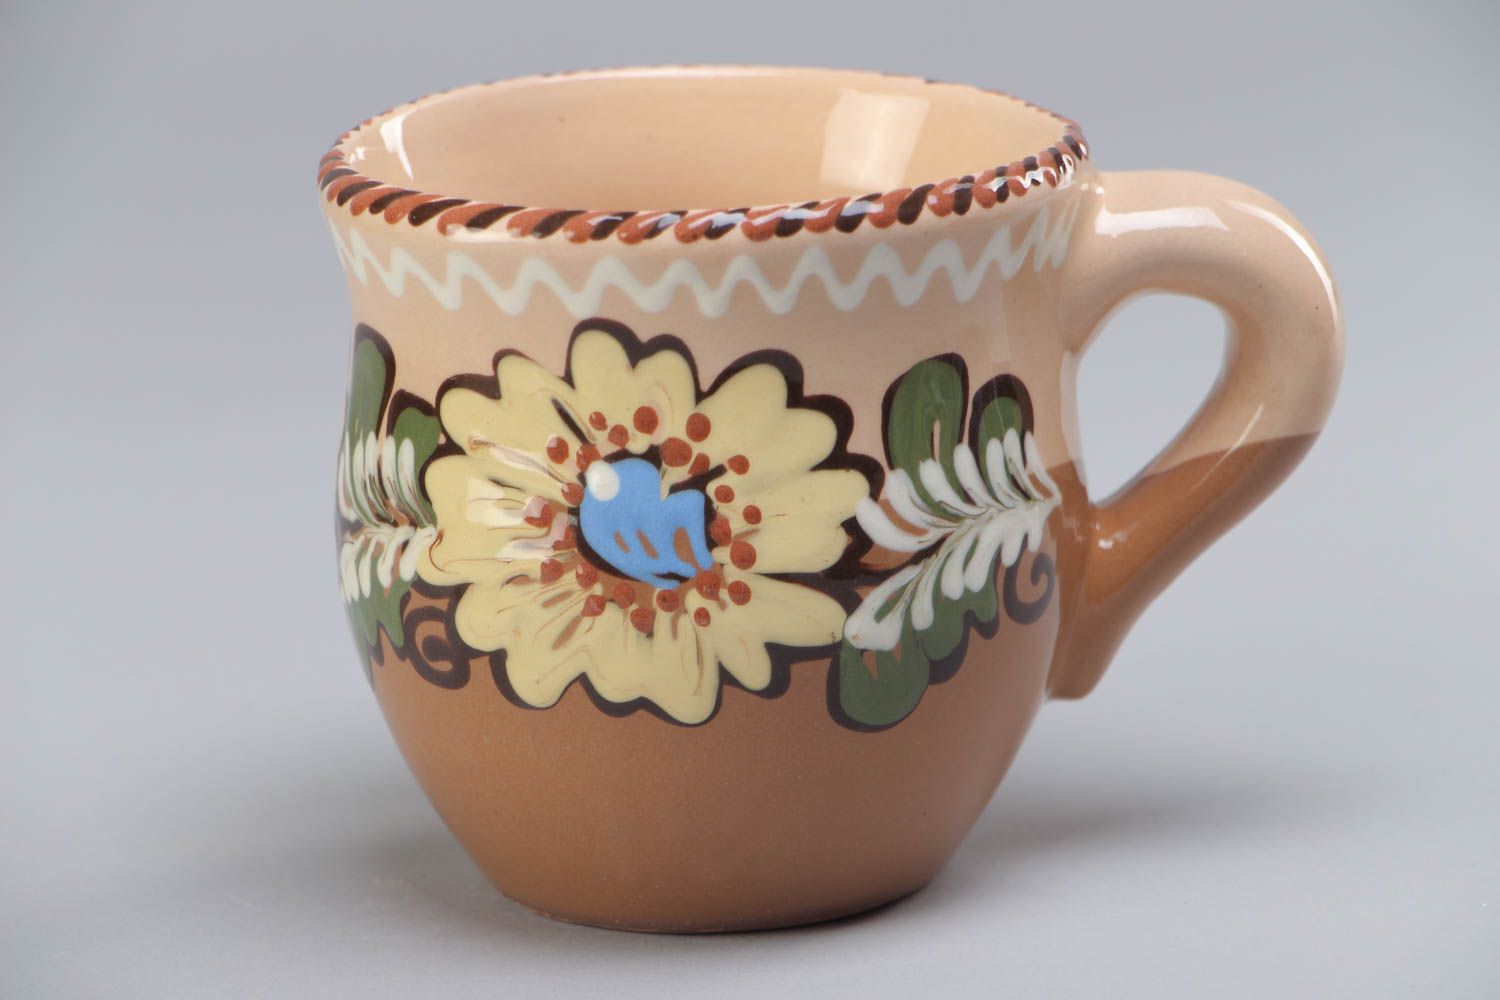 10 oz clay glazed cup with handle and floral design in brown, beige, and blue color photo 2